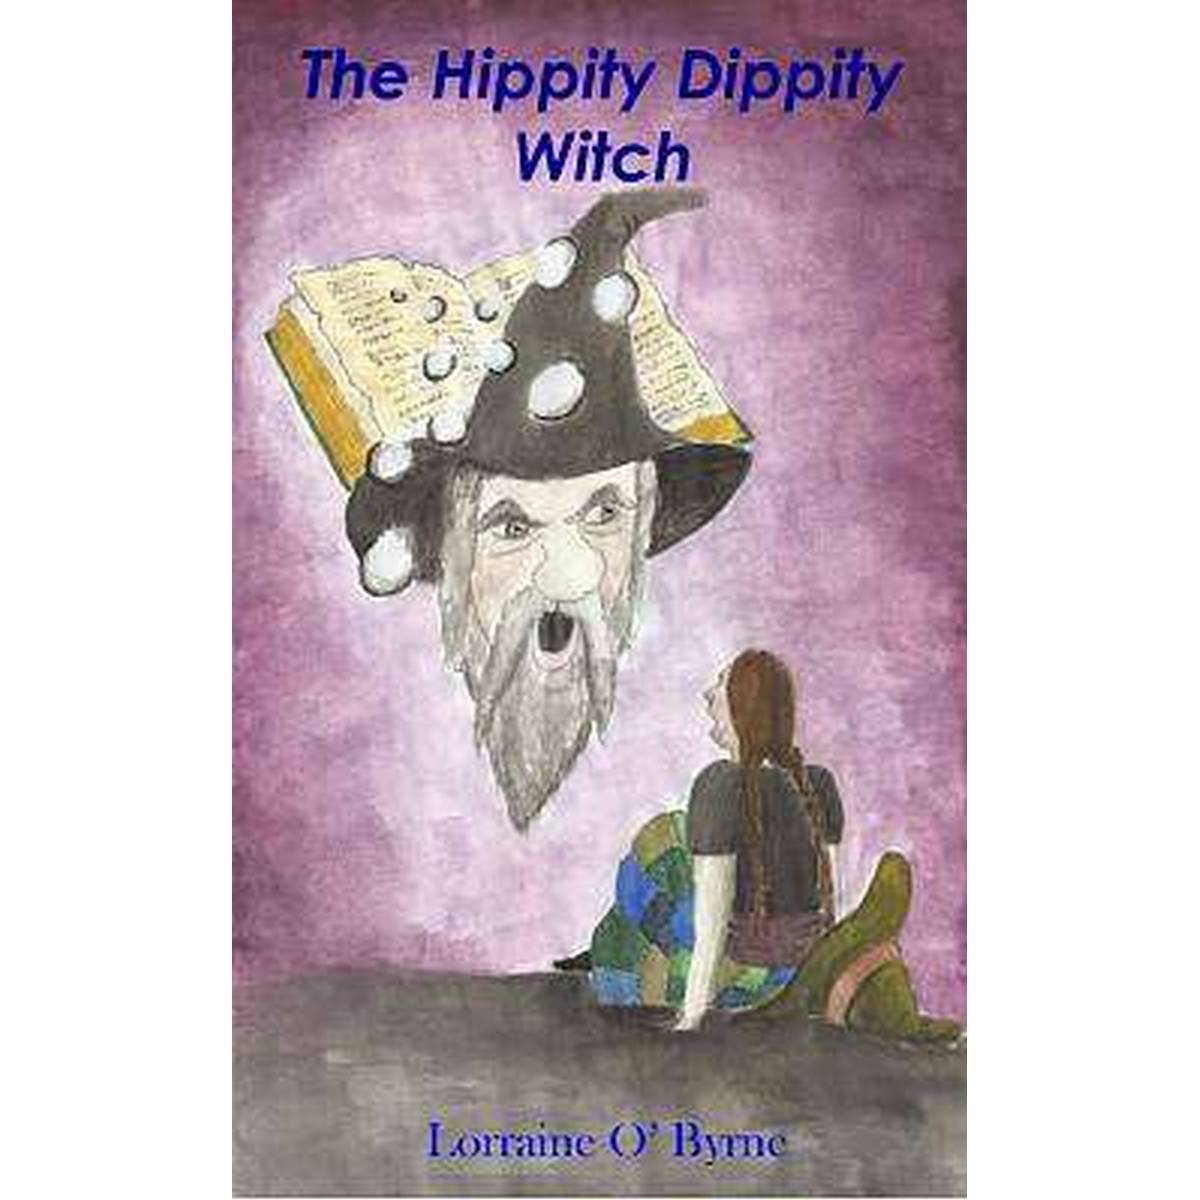 The Hippity Dippity Witch